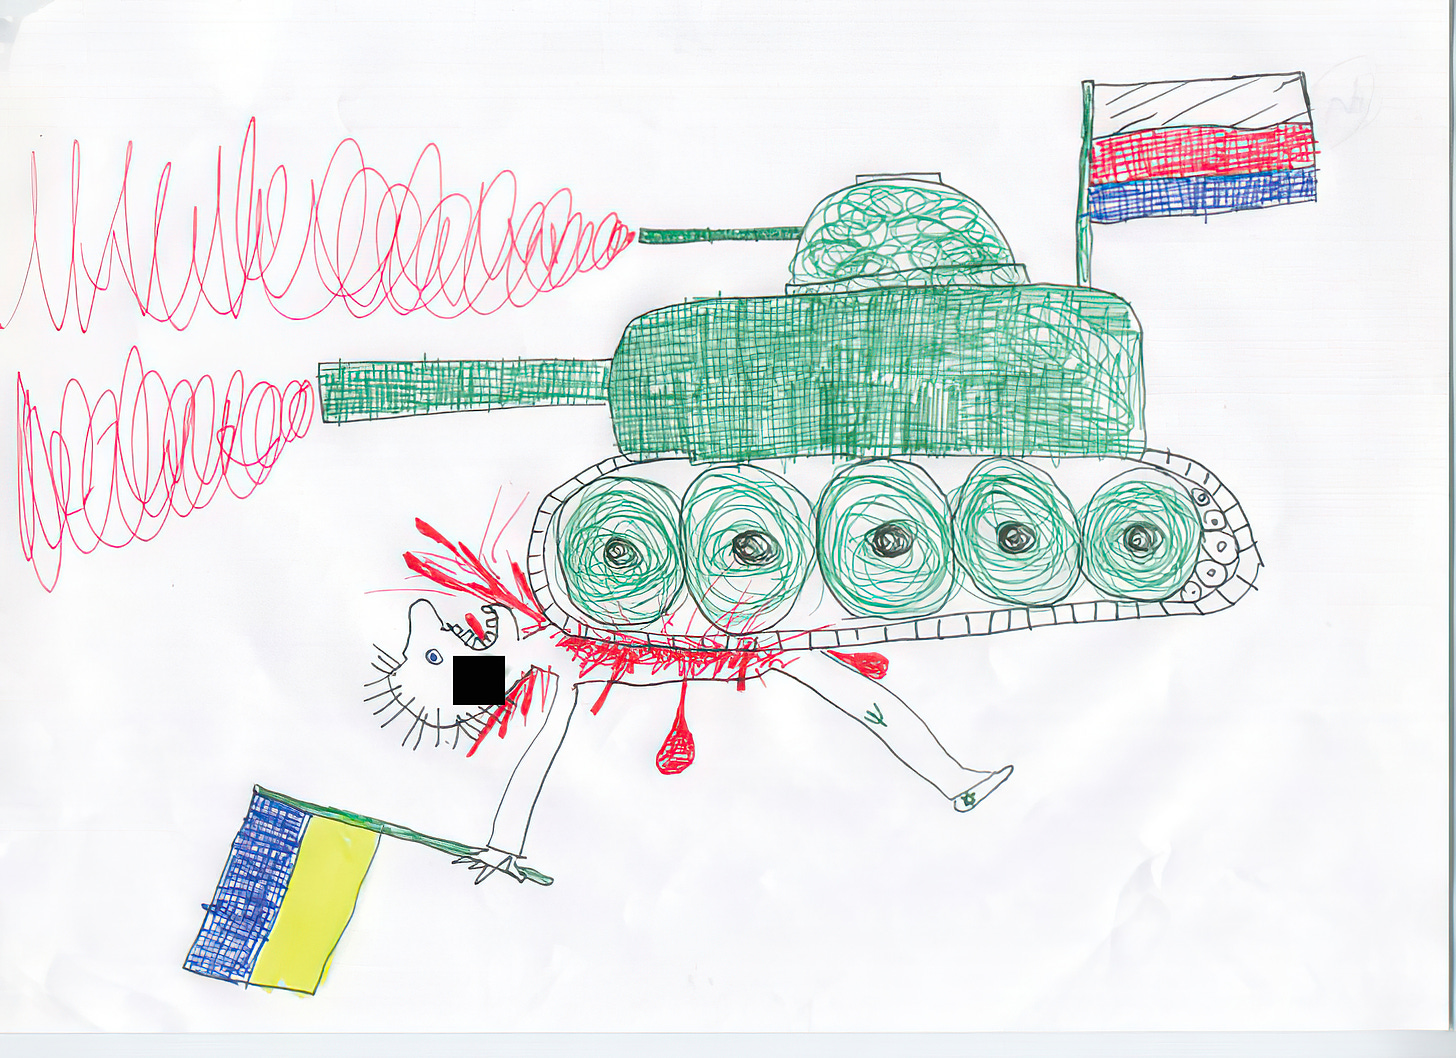 A tank with a color-impaired Russian flag runs over a man holding a Ukrainian flag. Blood spurts from his body. He has a swastika on his cheek (censored here with a black bar). On his knee, there is a sign that may depict the trident of Ukraine. On the shoe, one can faintly see another symbol. It could be a Star of David, although the quality is too poor to say for certain.